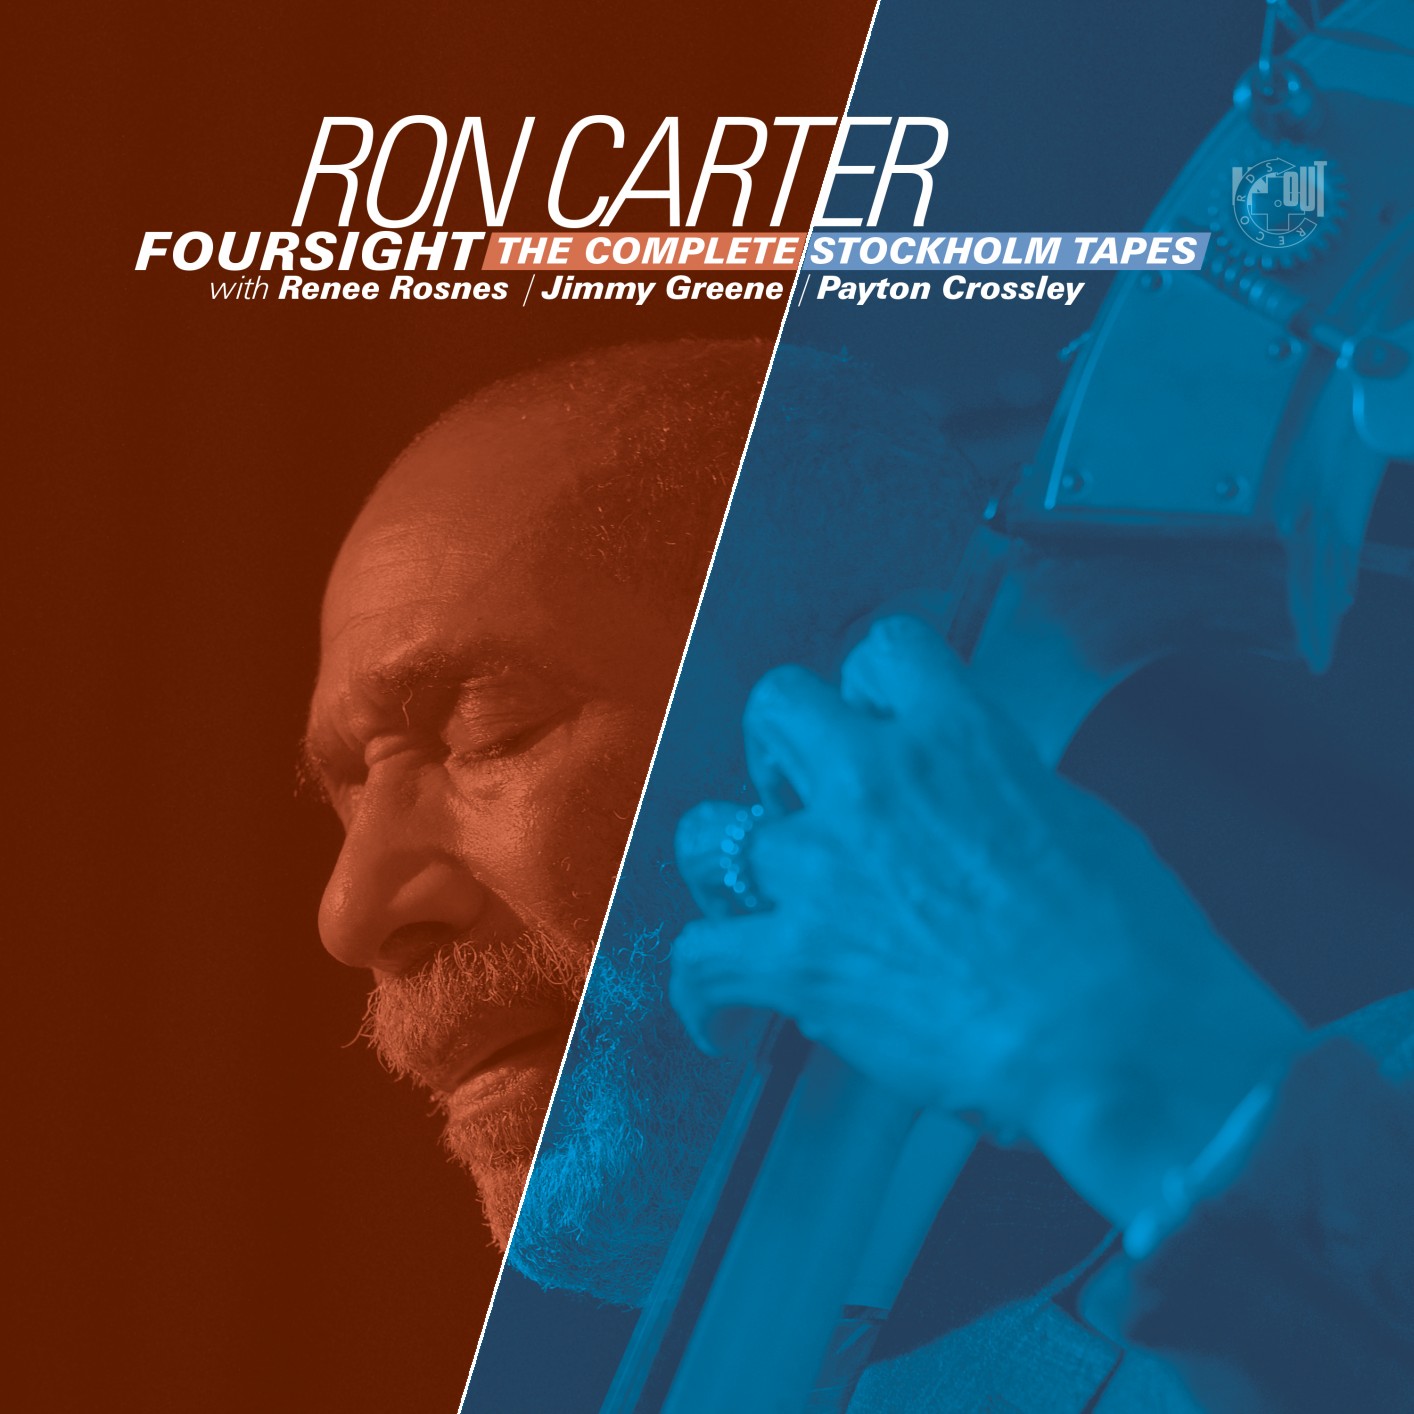 Ron Carter - Foursight - The Complete Stockholm Tapes (2021) [FLAC 24bit/48kHz]